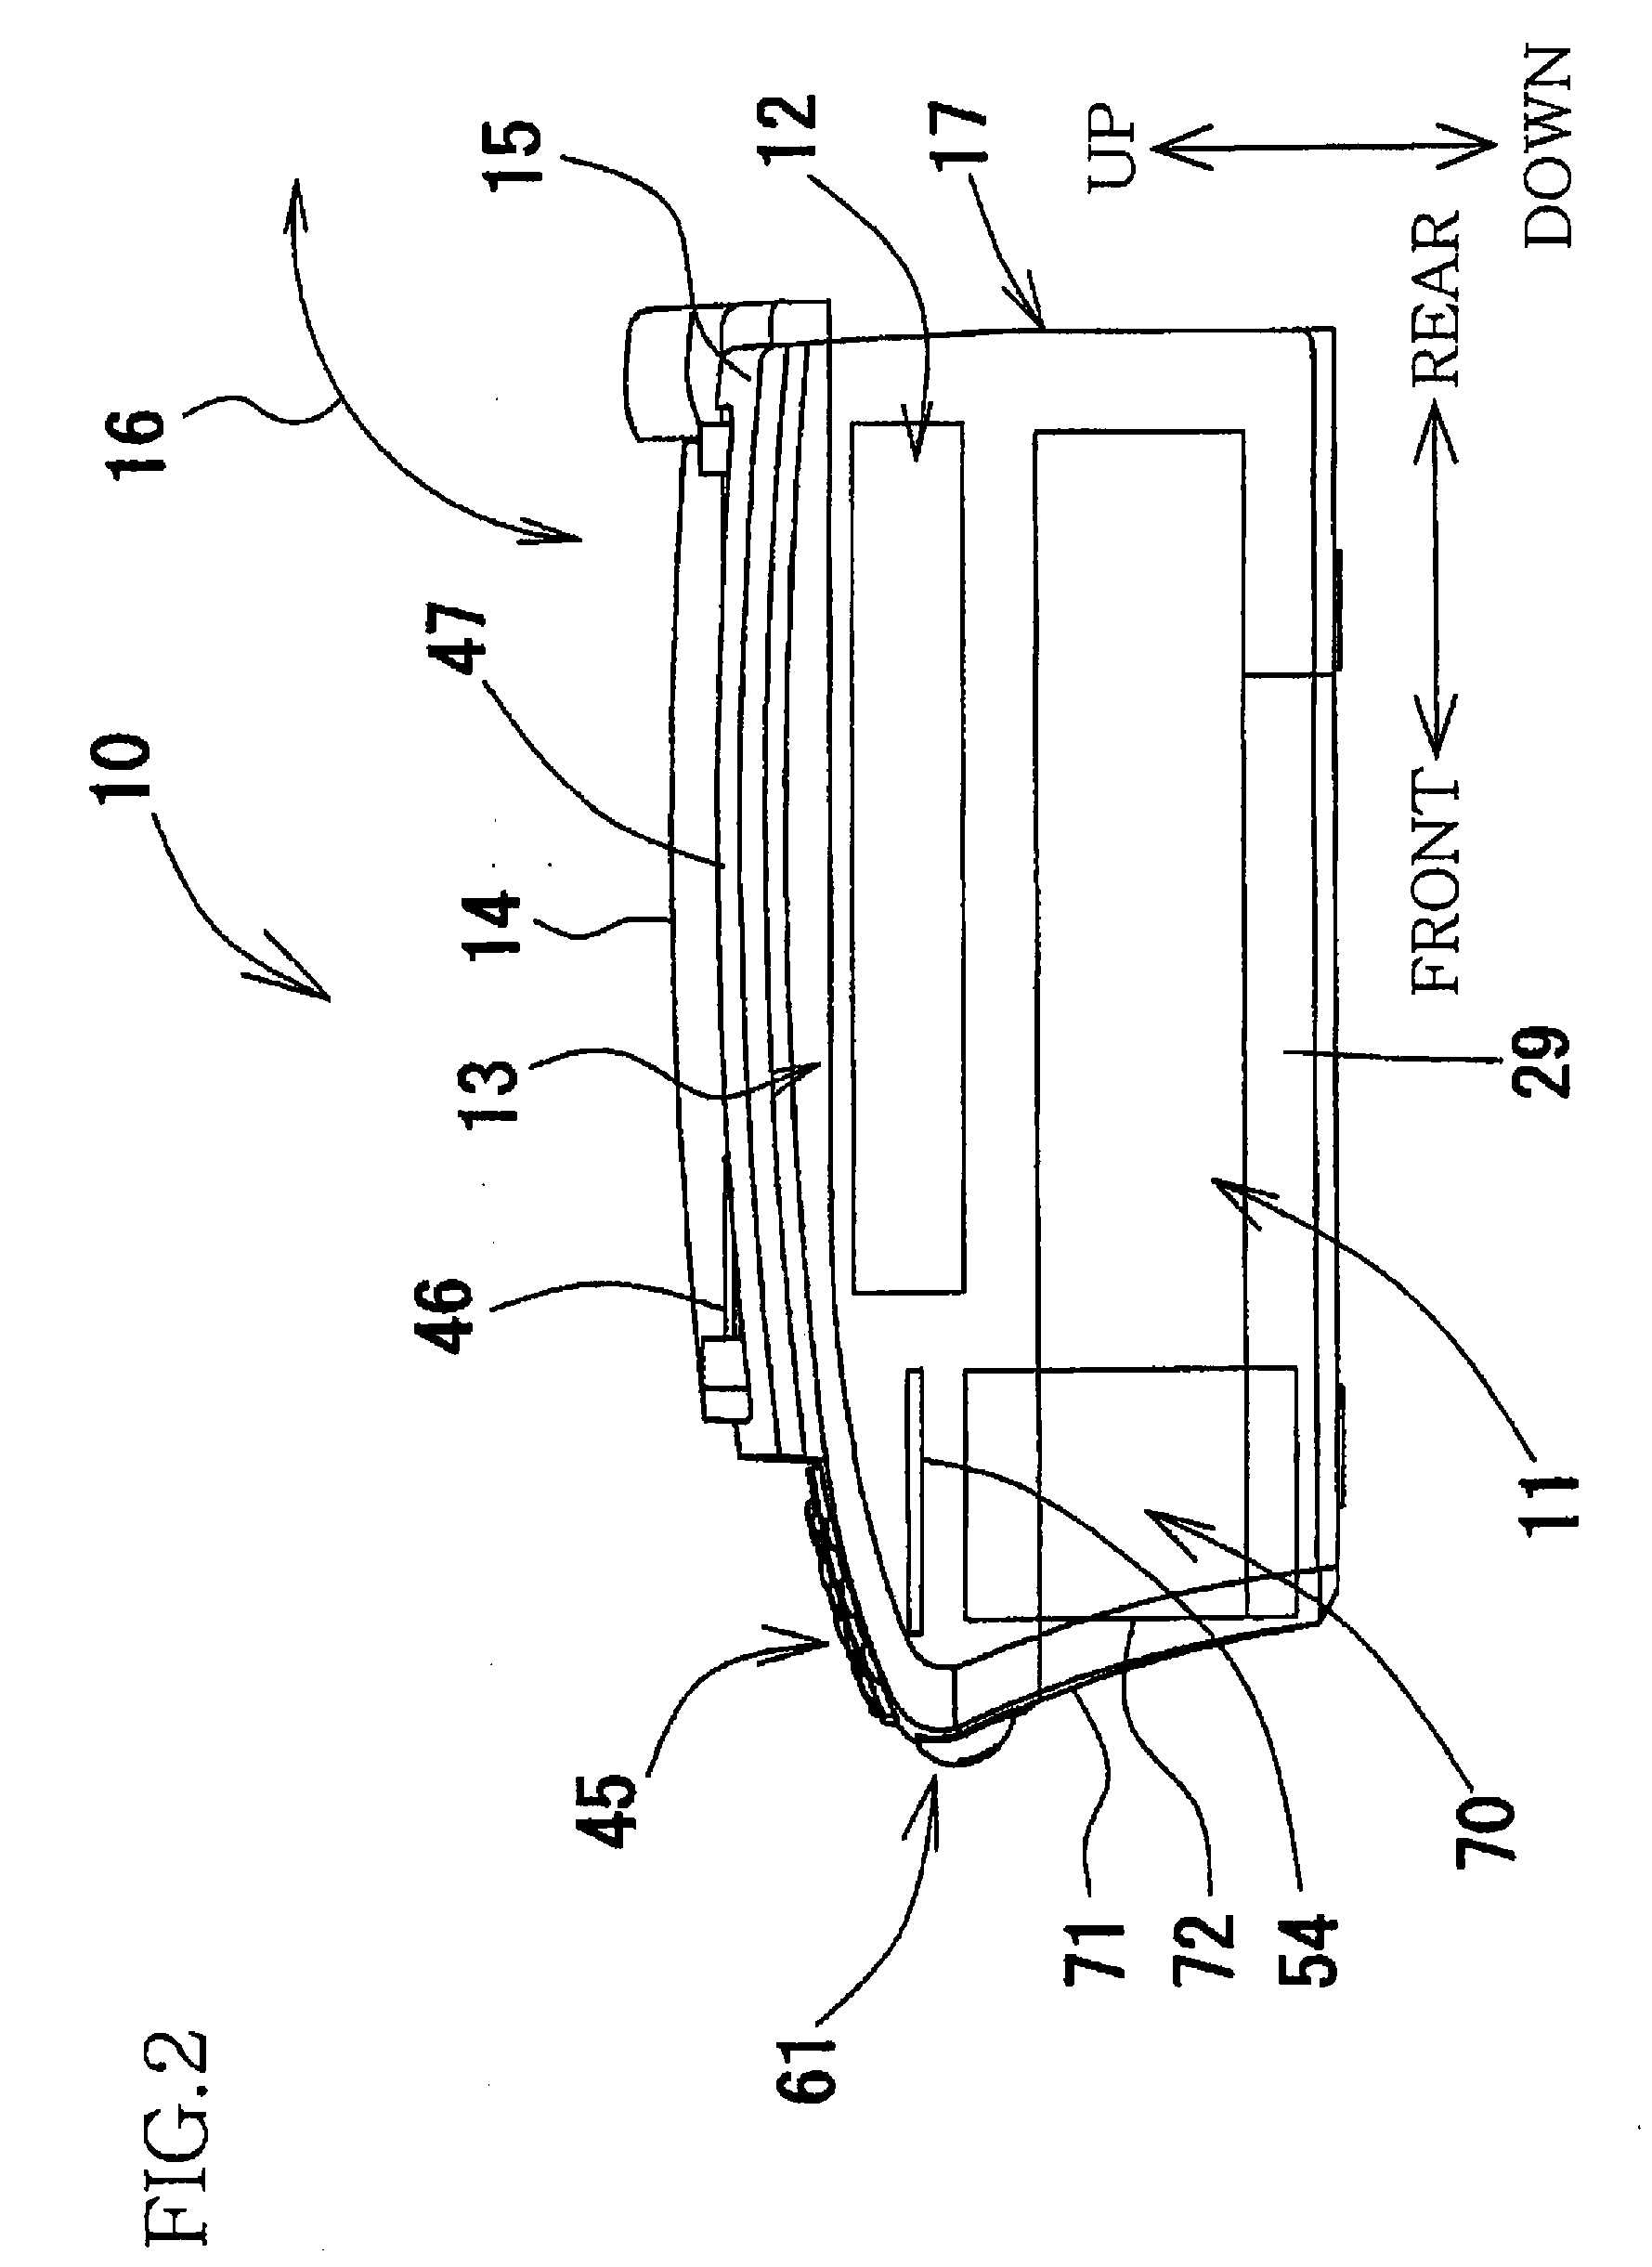 Ink cartridge holding device